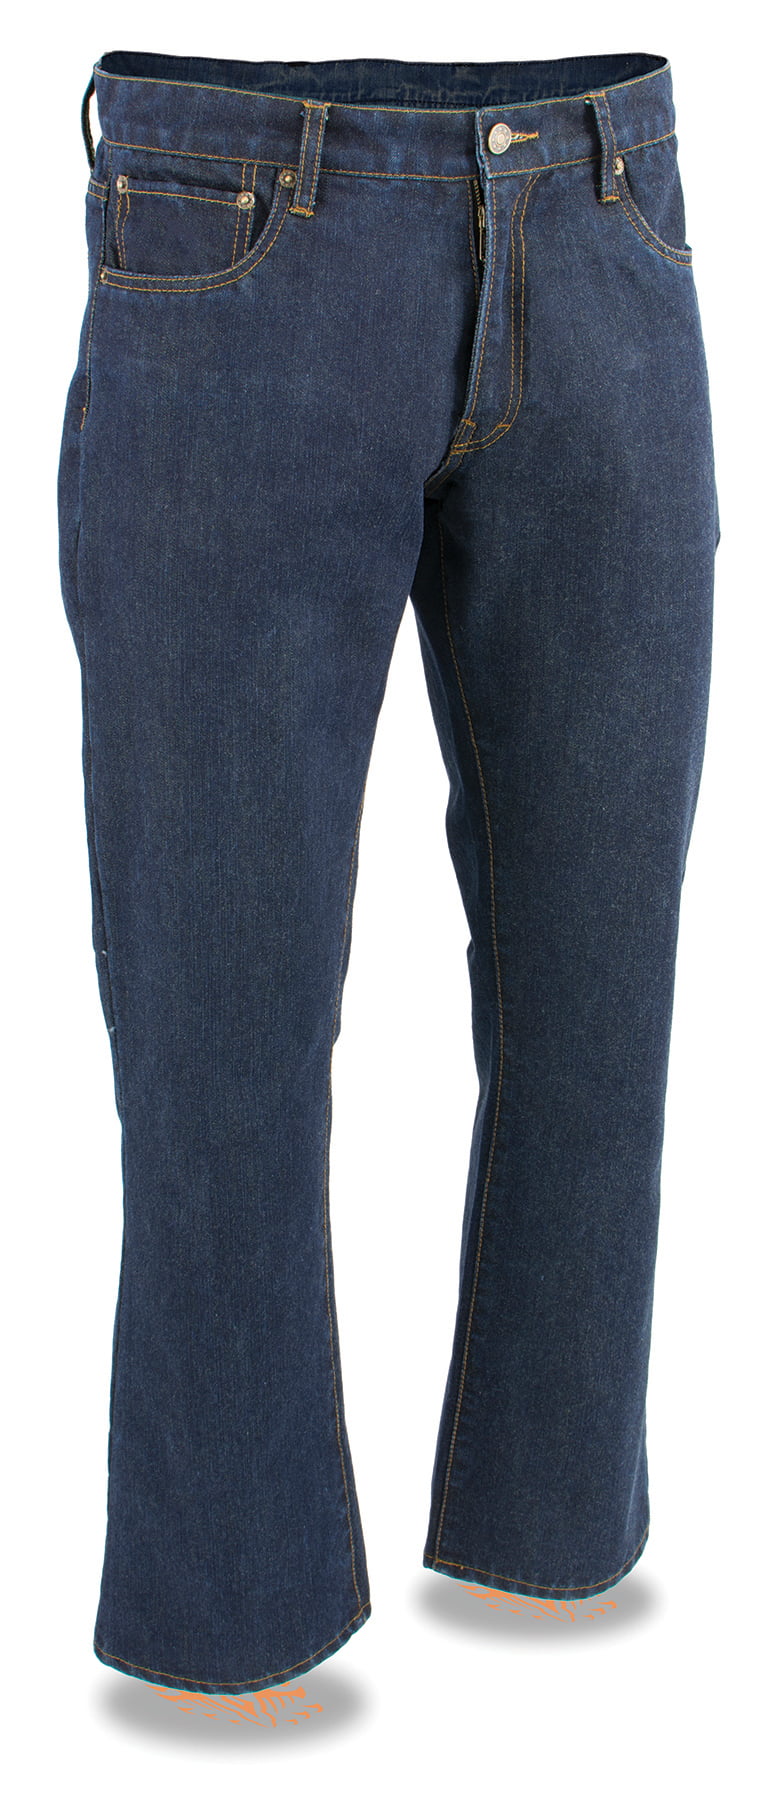 cyber monday mens jeans